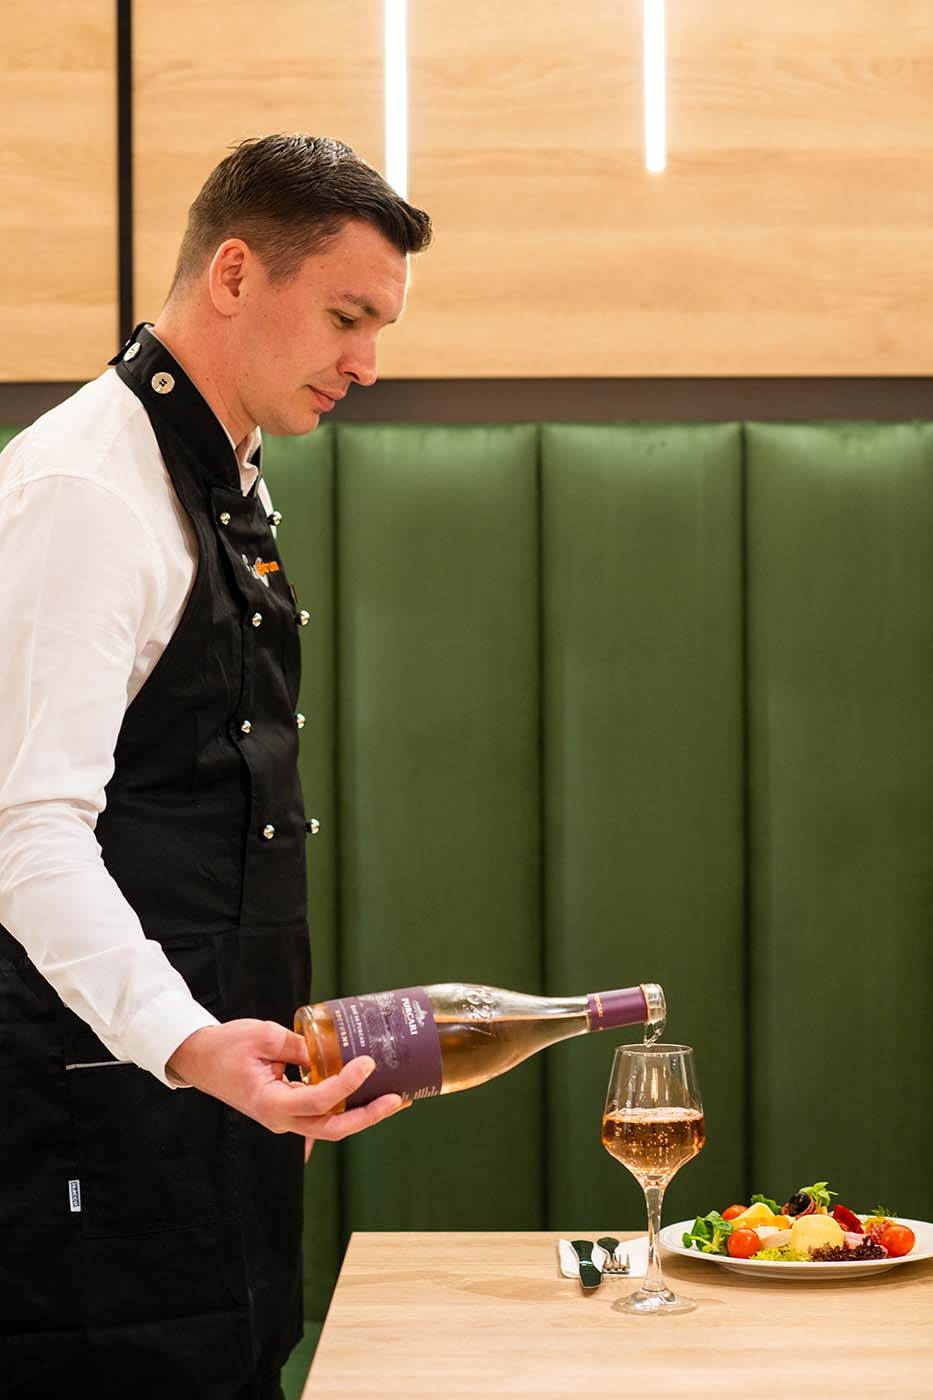 A chef pouring a bottle of wine on a hotel table.